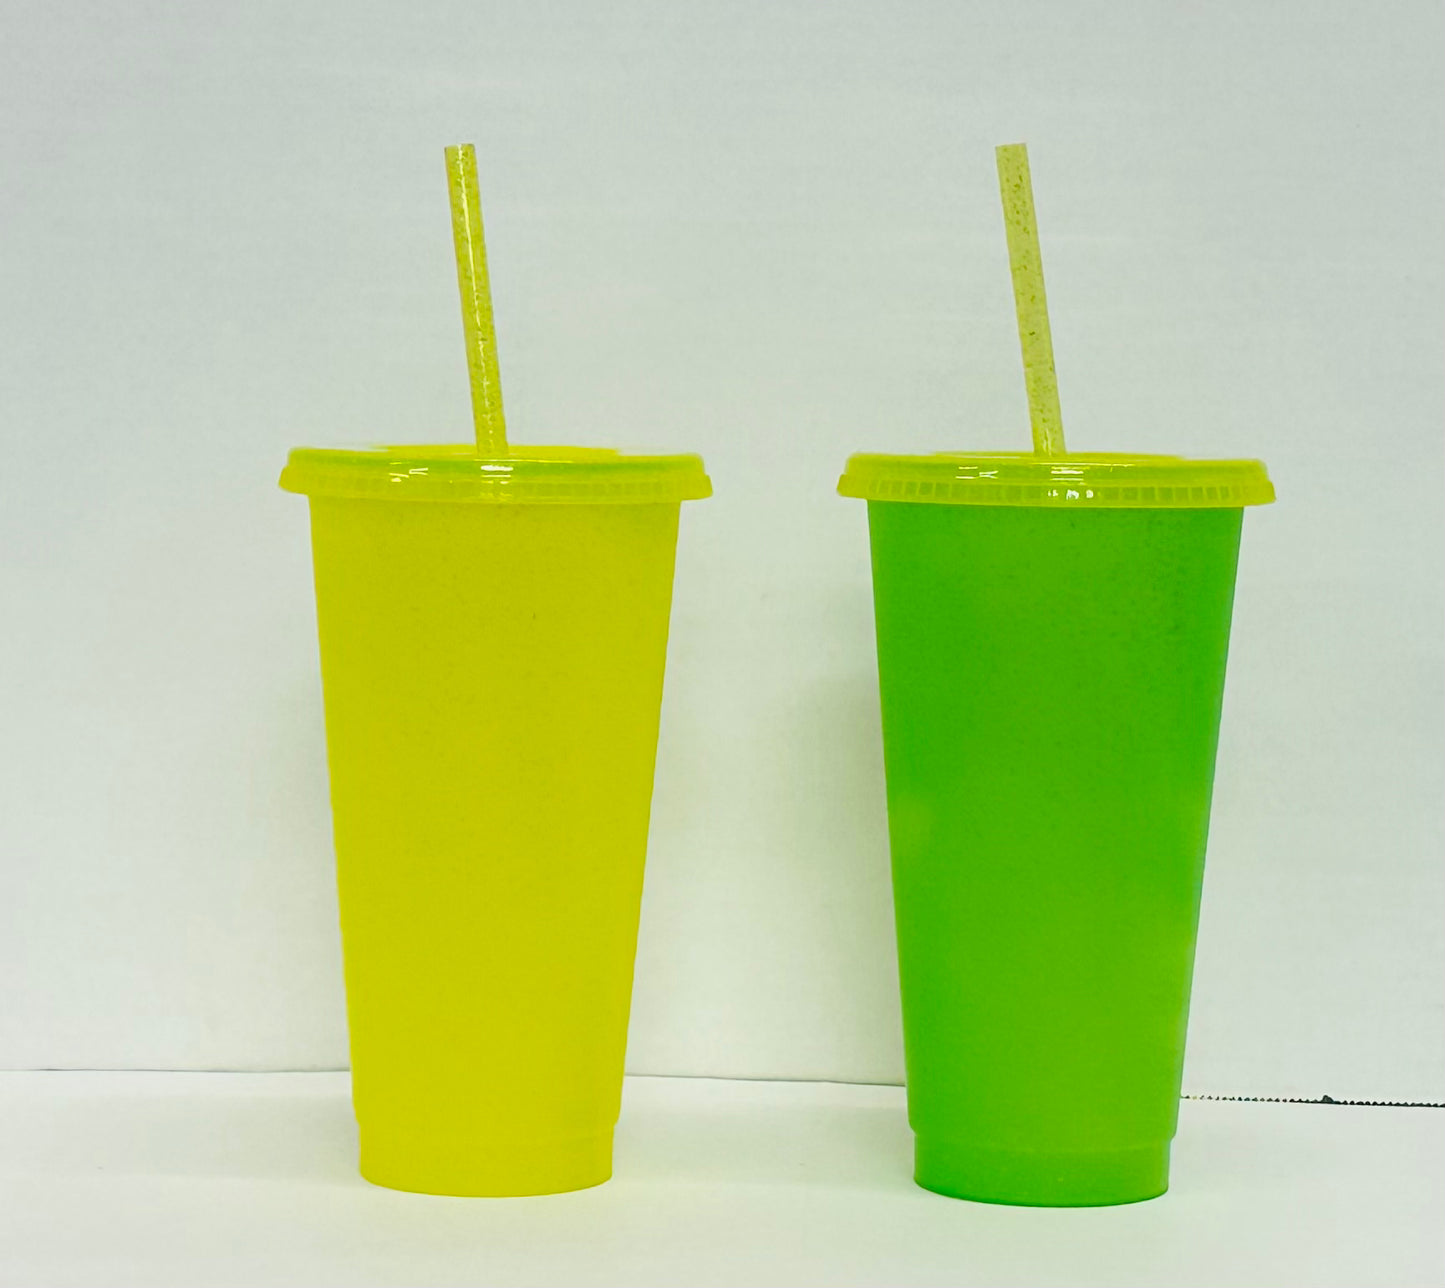 Glitter Colour Changing 24oz Single Walled Cold Cups